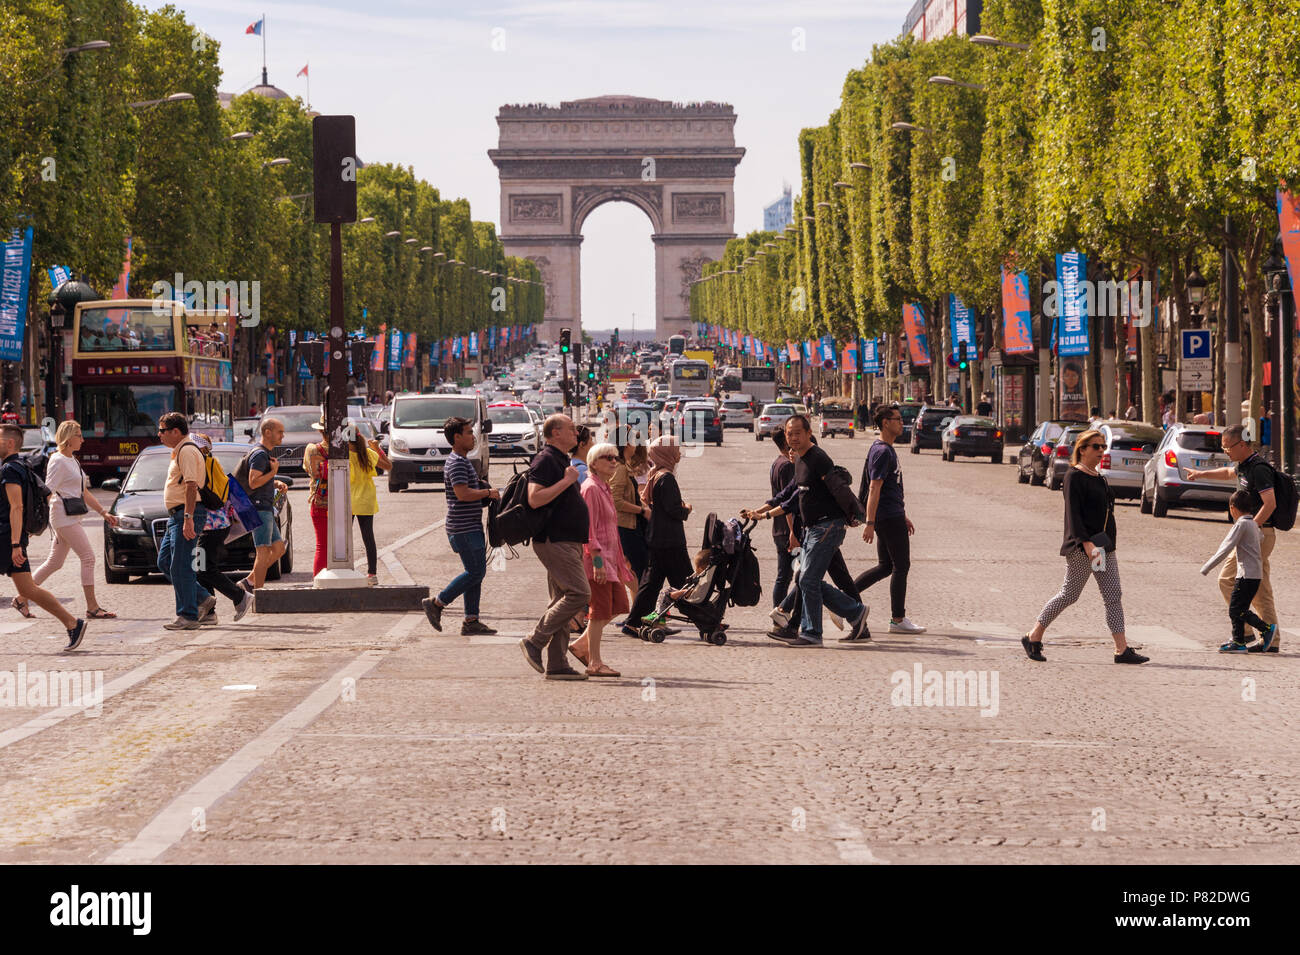 Paris, France - 23 June 2018: A crowd of people crossing Avenue des Champs-Elysees with Arc de Triomphe in the Background Stock Photo